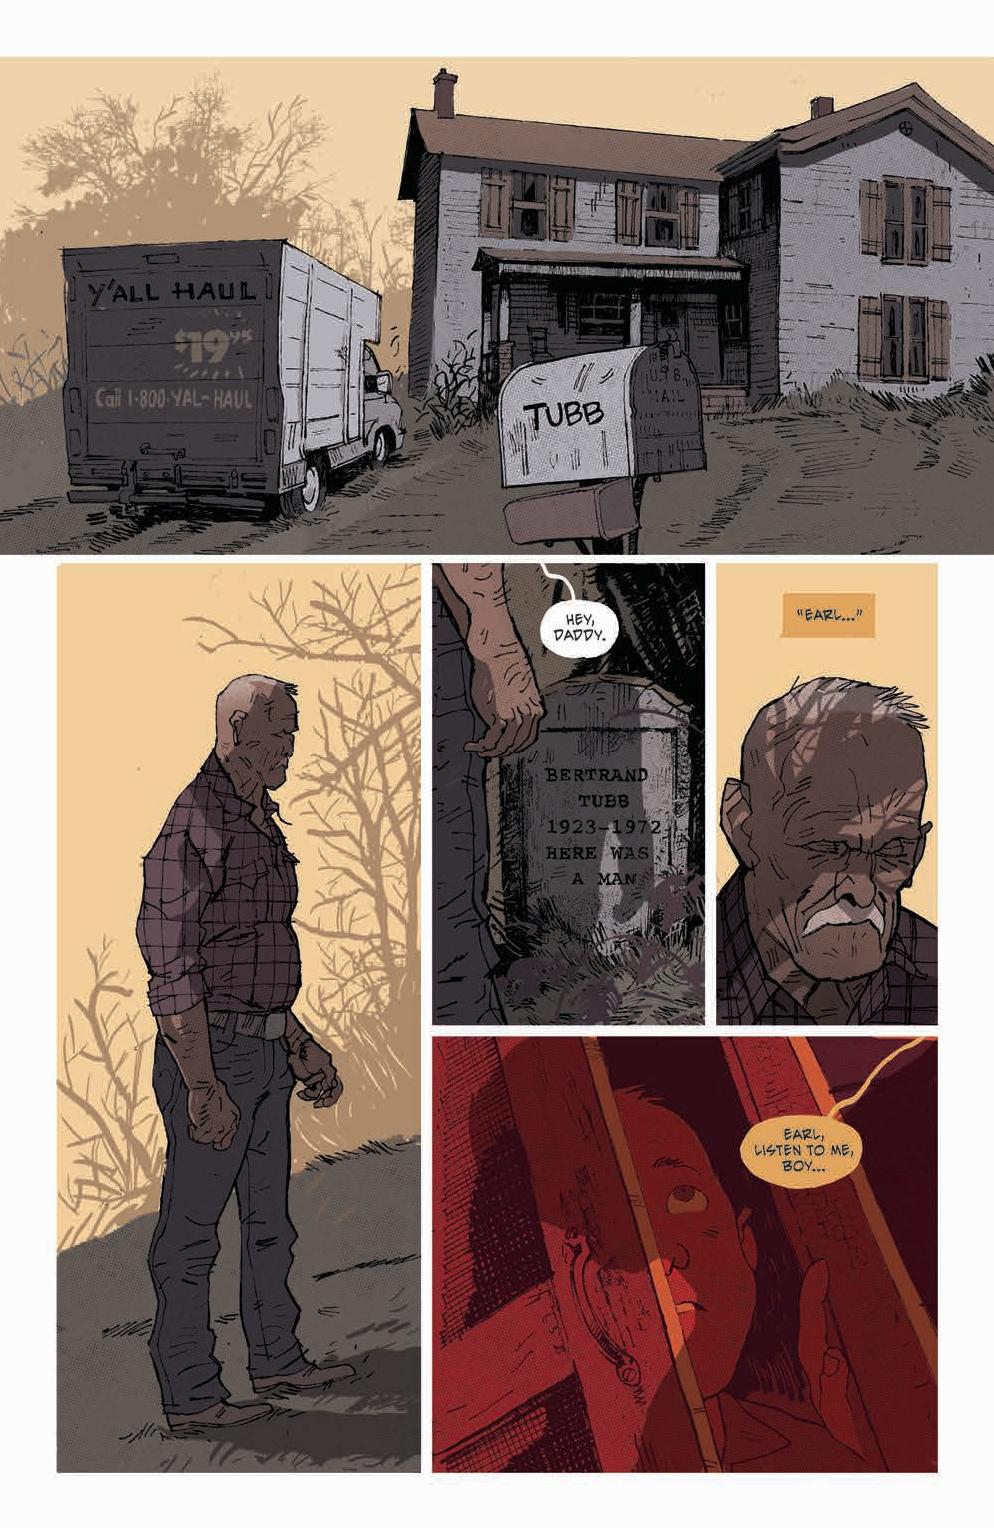 Southern Bastards Graphic Novel Volume 1 Here Was A Man (Mature)